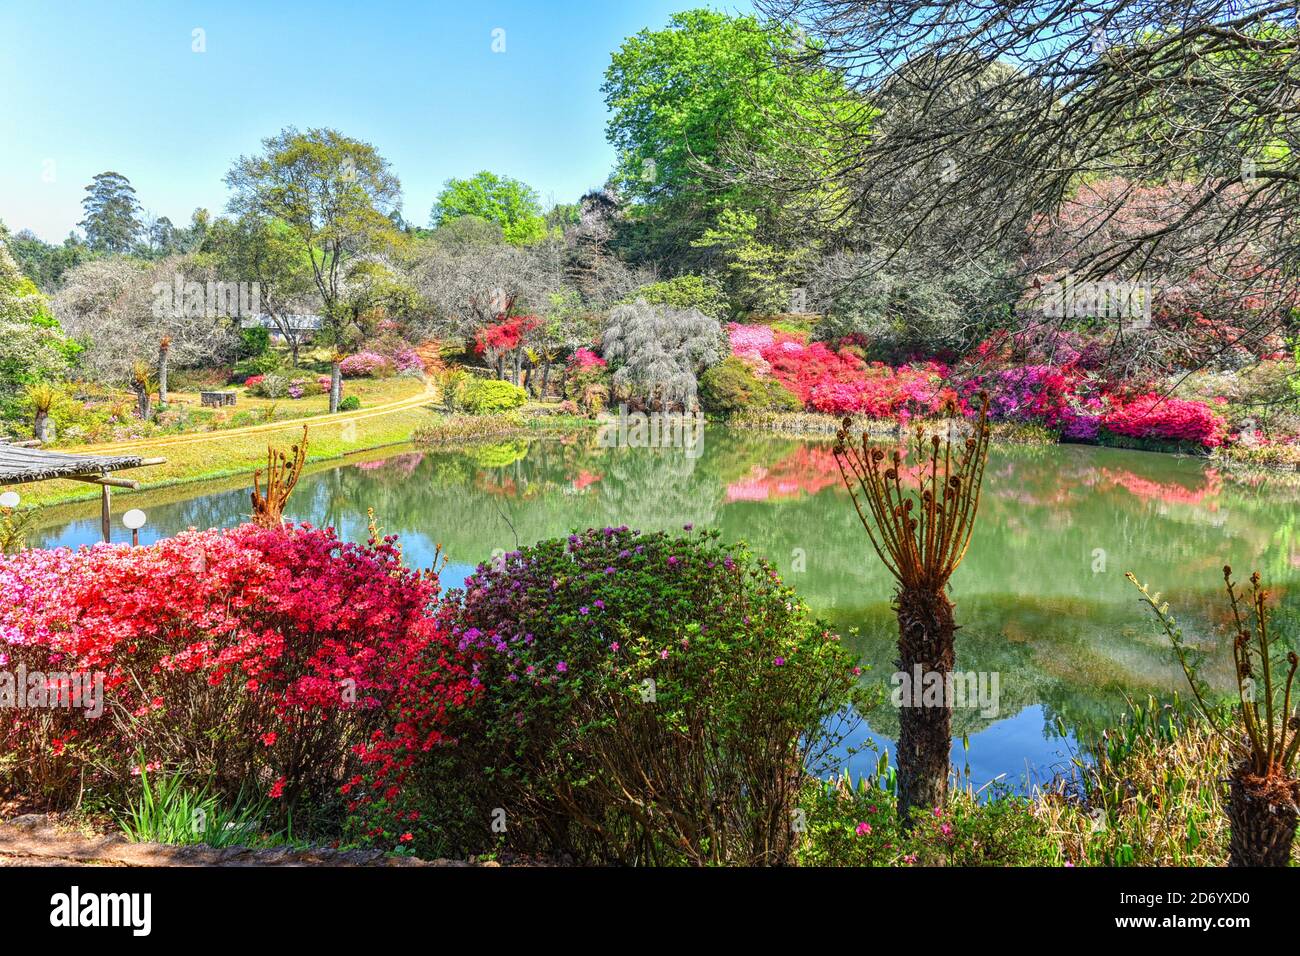 Nature at the Cheerio Gardens, Tzaneen, South Africa Stock Photo